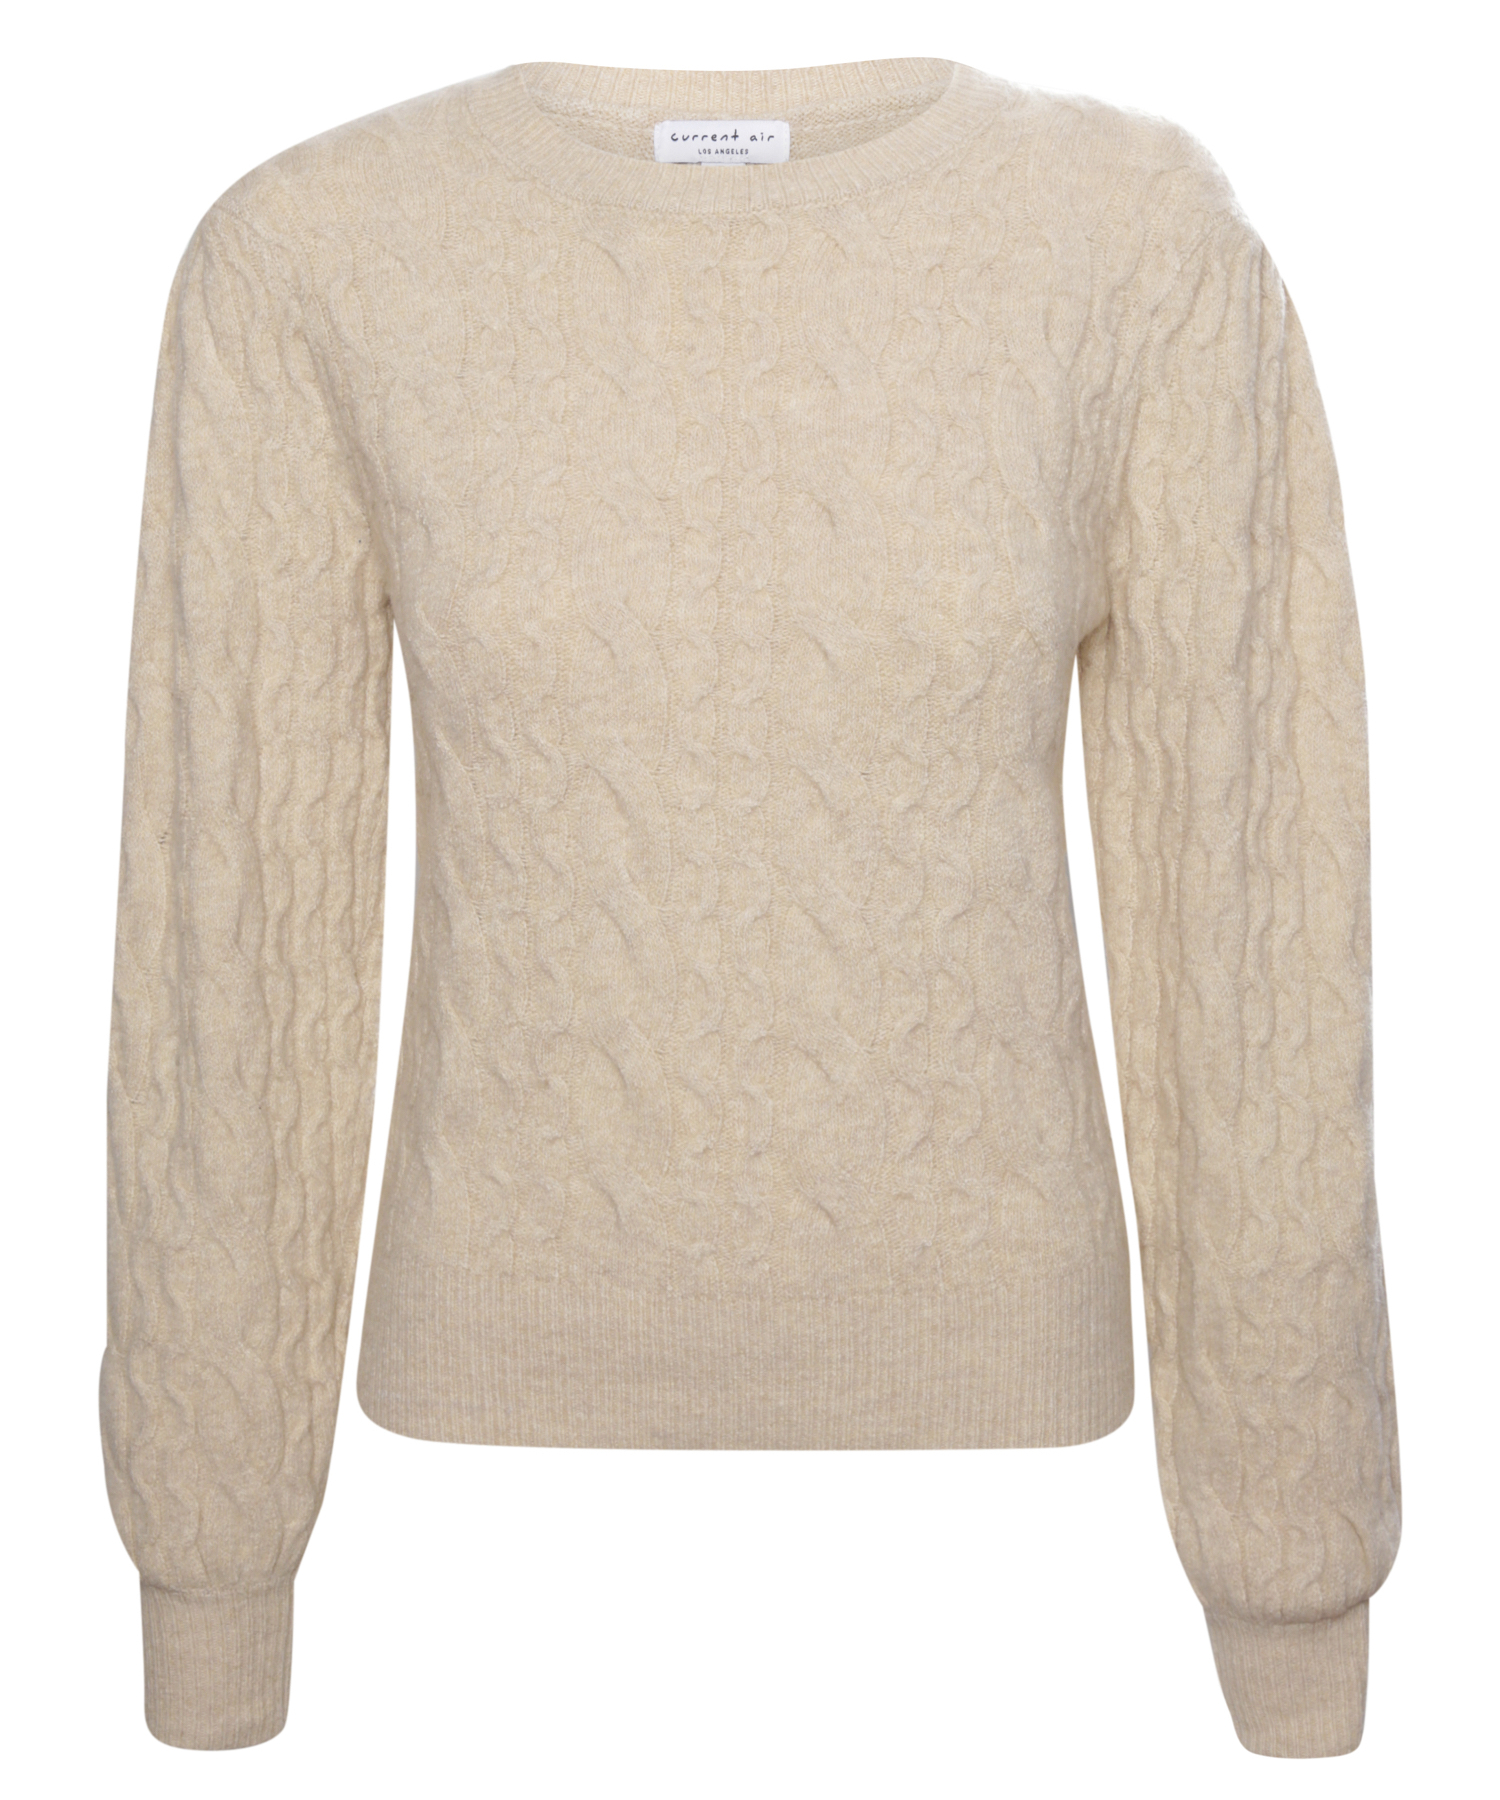 Current Air Puff Sleeve Cable Knit Sweater